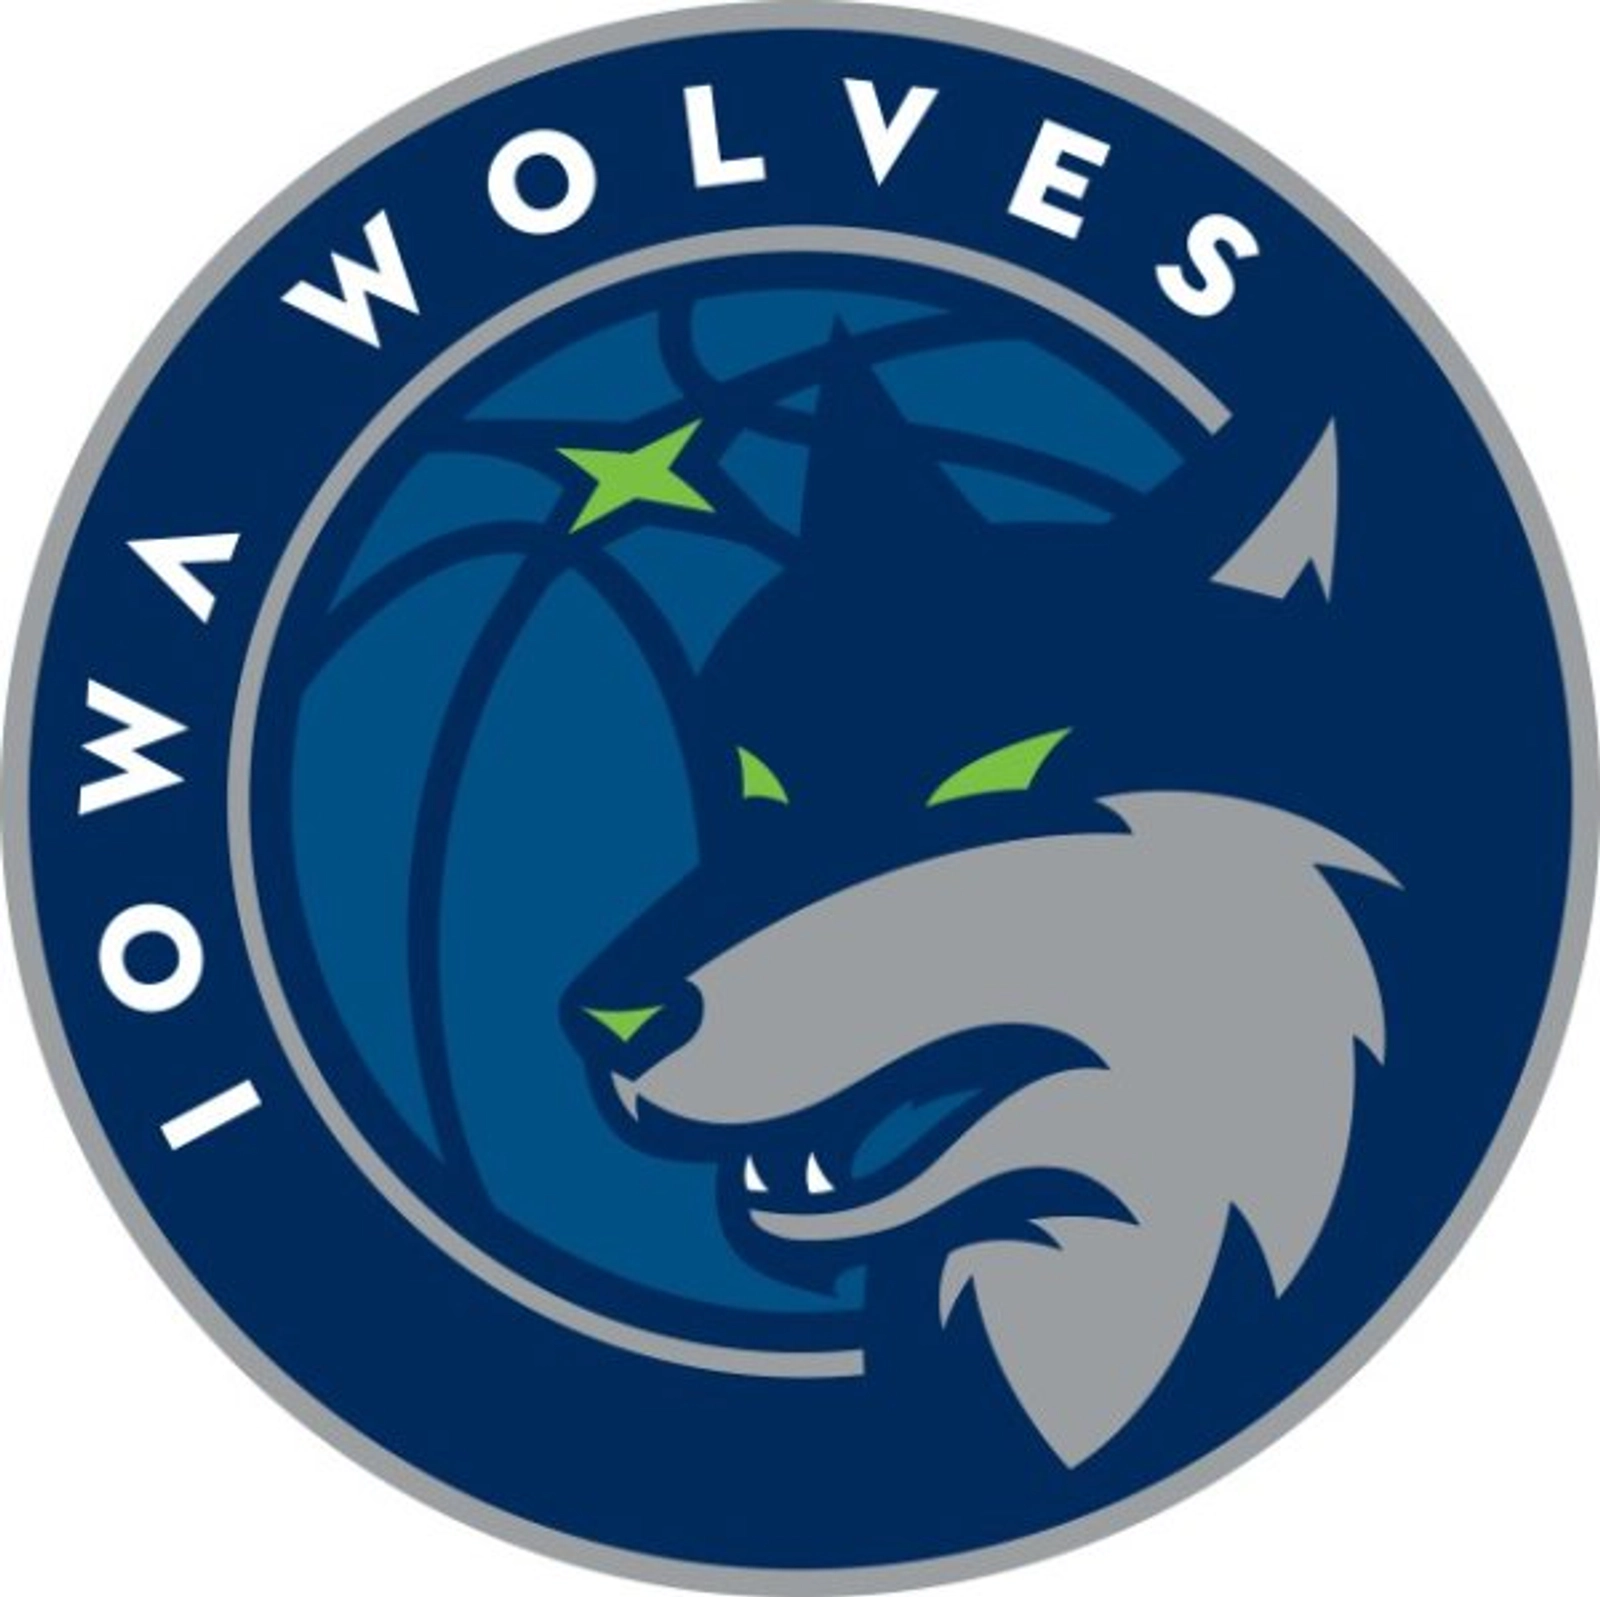    Win Tickets To The Iowa Wolves! - Thumbnail Image